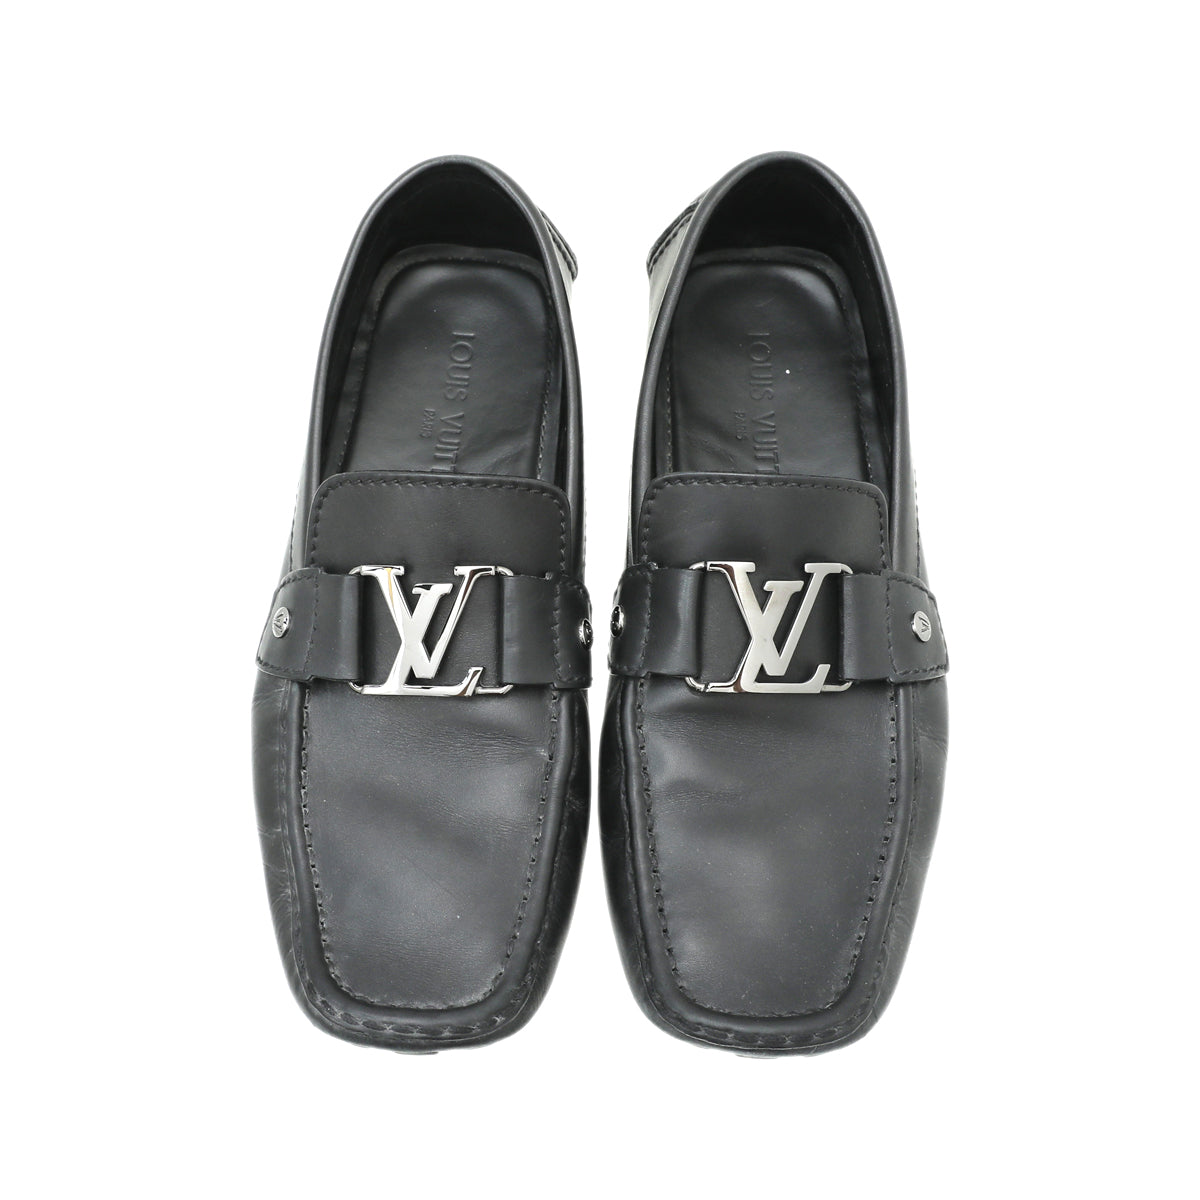 Monte carlo leather flats Louis Vuitton Black size 42.5 EU in Leather -  32562858